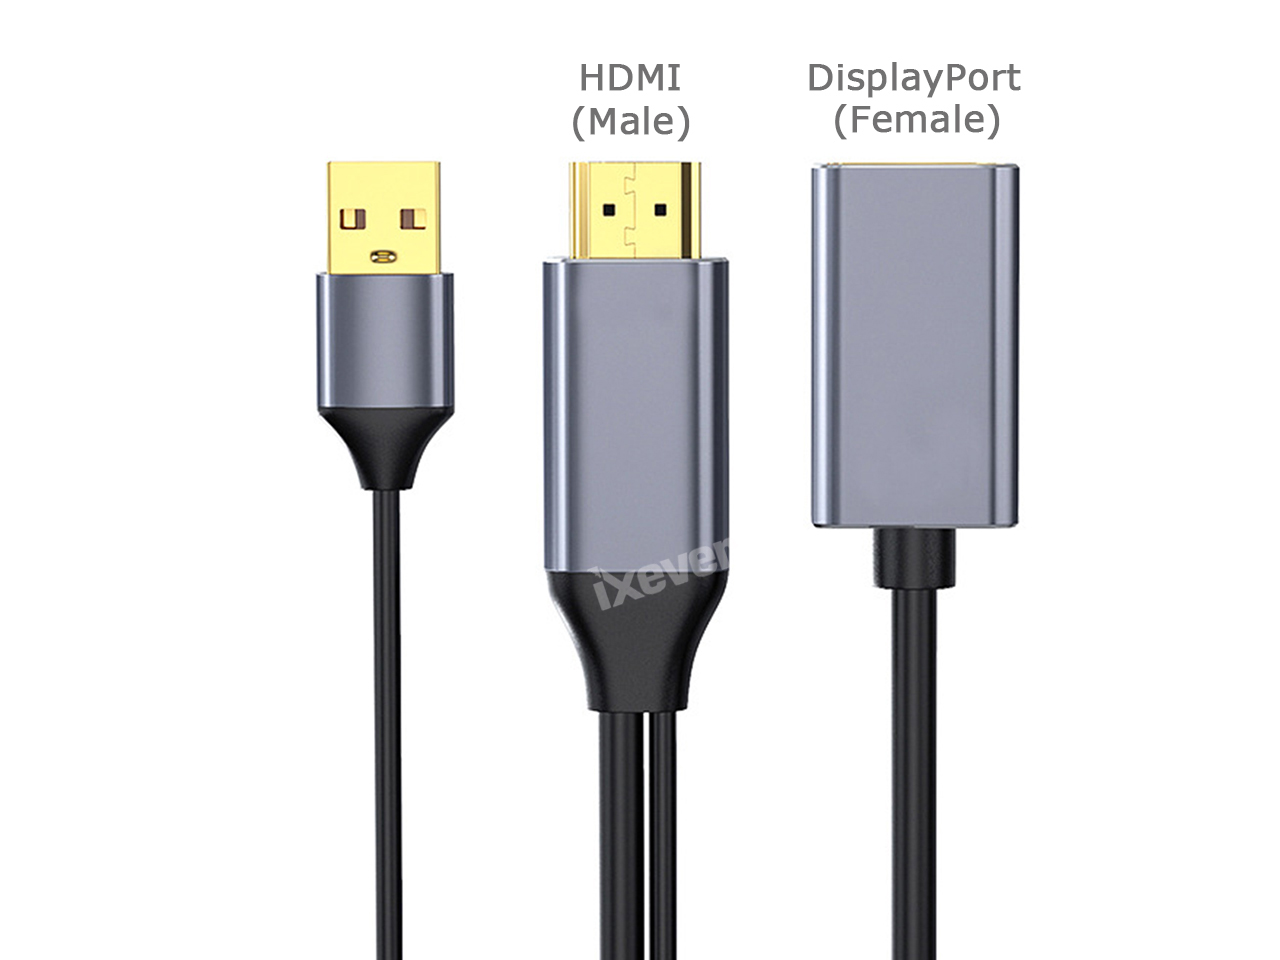 IXEVER USB C to HDMI Adapter Cable for Nintendo Switch Dock, Type